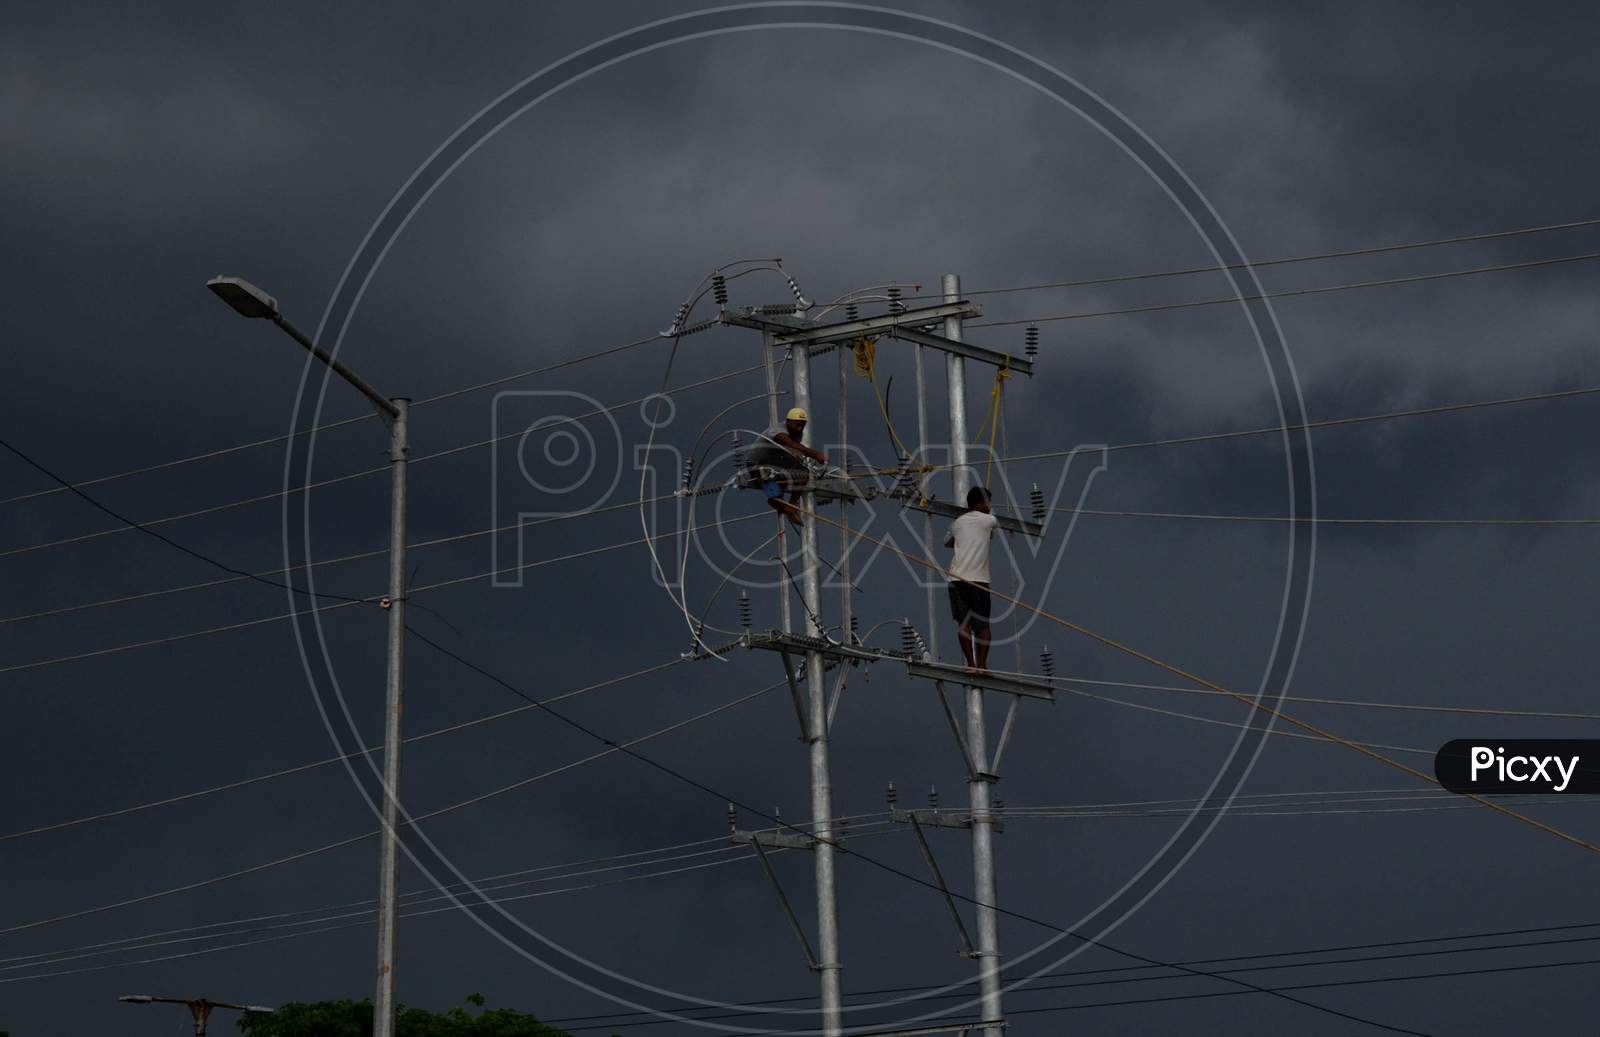 Labourers Work On An Electric Pole As Dark Clouds Cover Over The Sky, In Guwahati On Saturday, June 13, 2020.